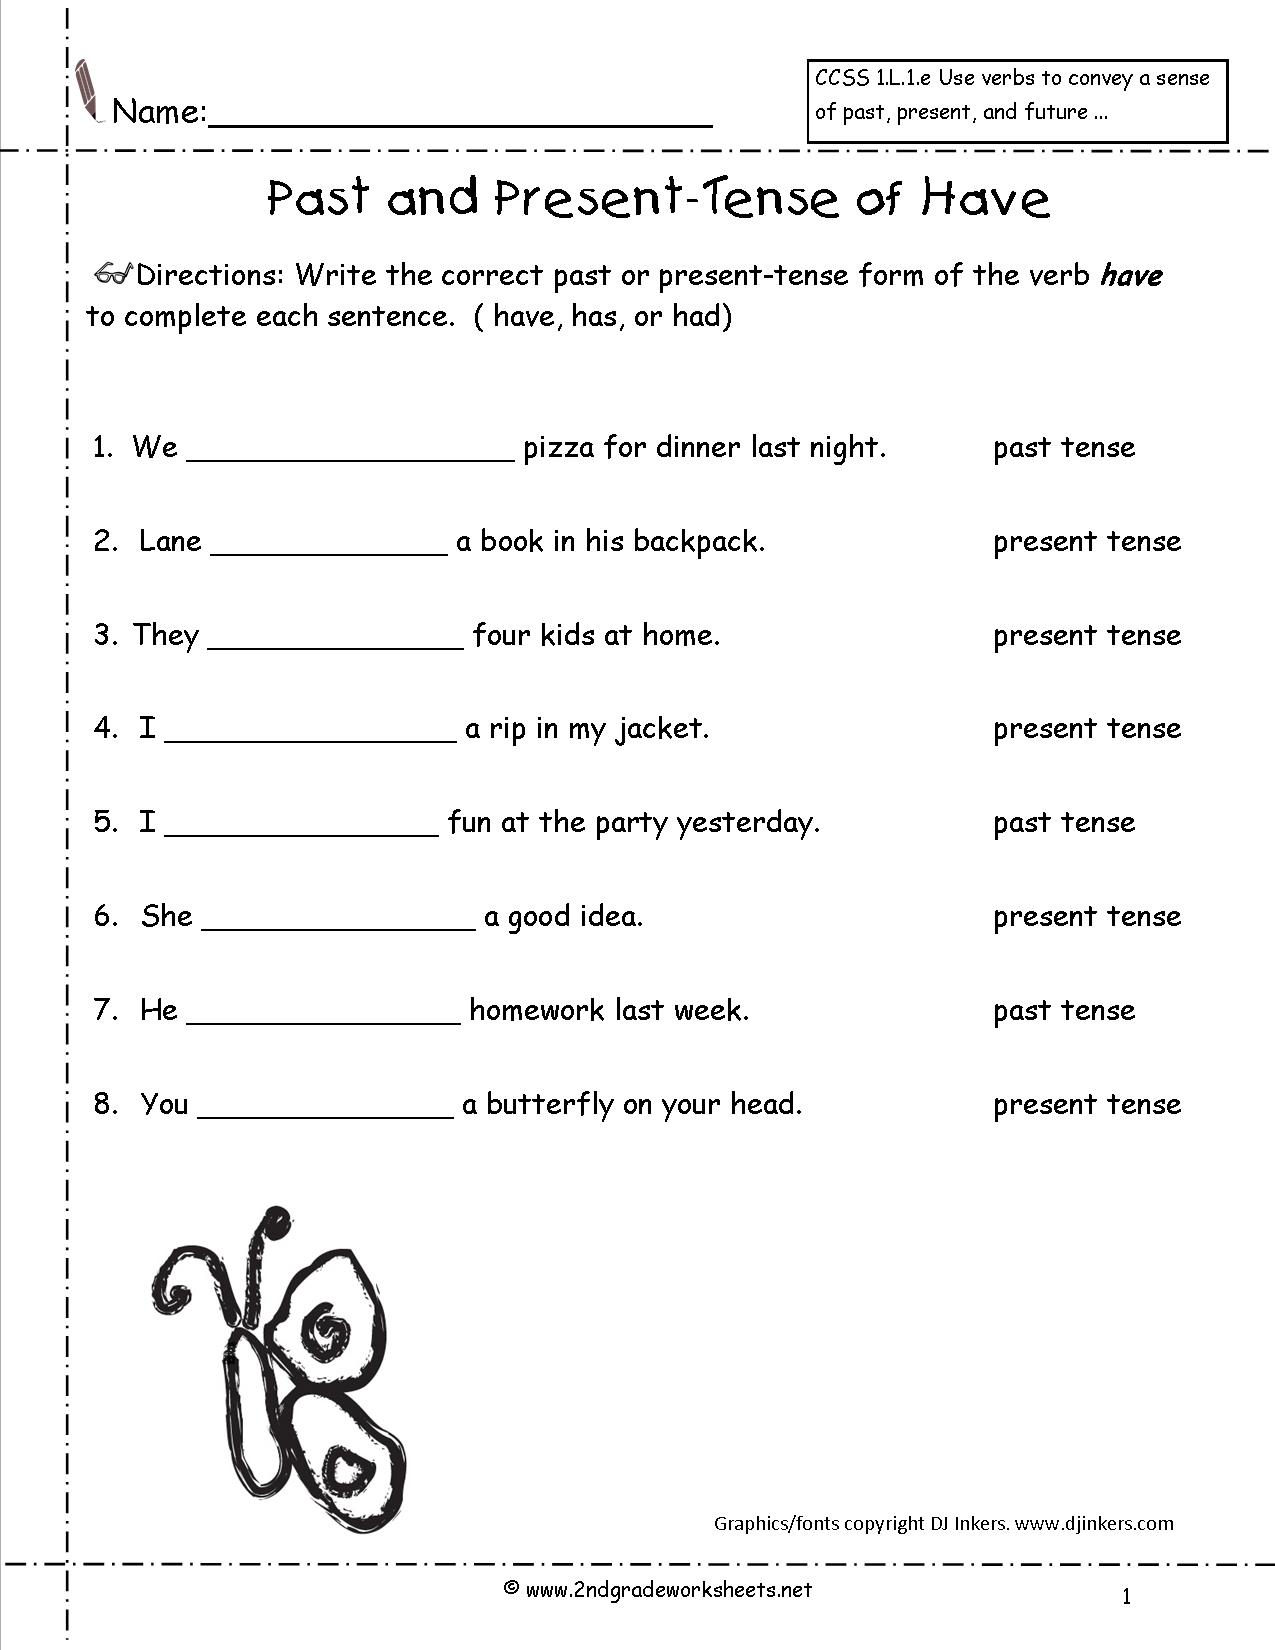 Future Tense Verbs Worksheets For 2nd Grade